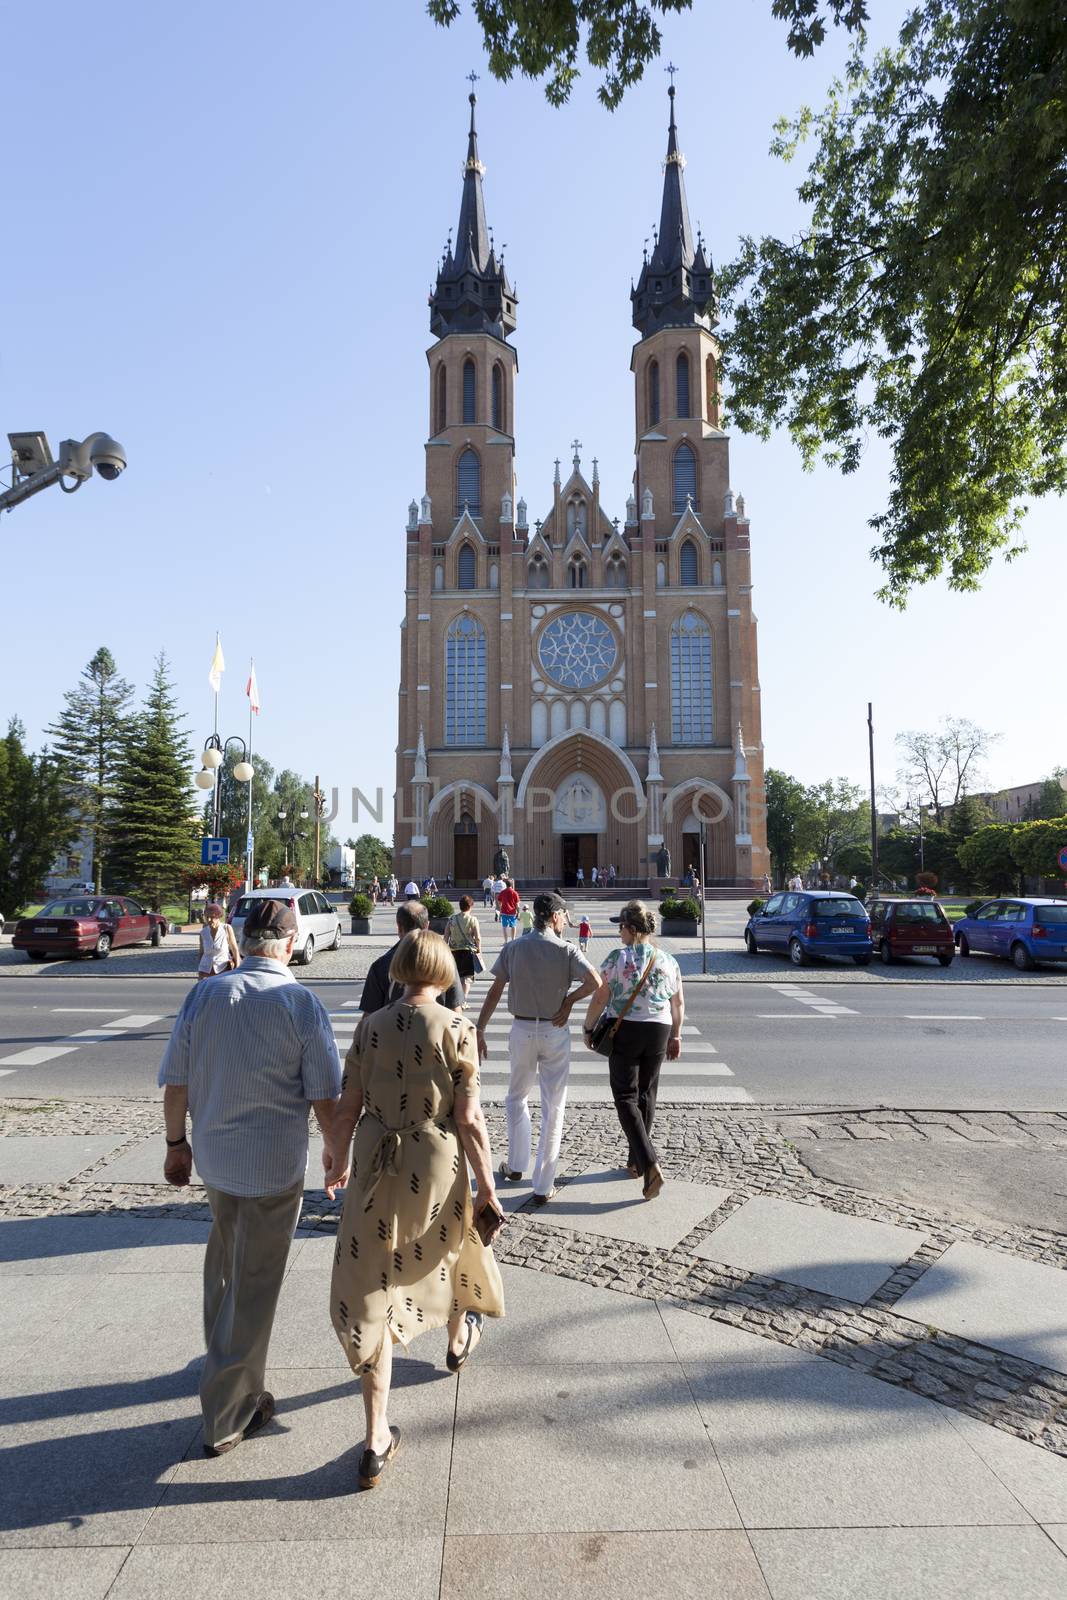 RADOM CITY, POLAND - August 8, 2014: Unidentified people walk in front of Catholic cathedral of the Protection of the Blessed Virgin Mary in Radom, Poland